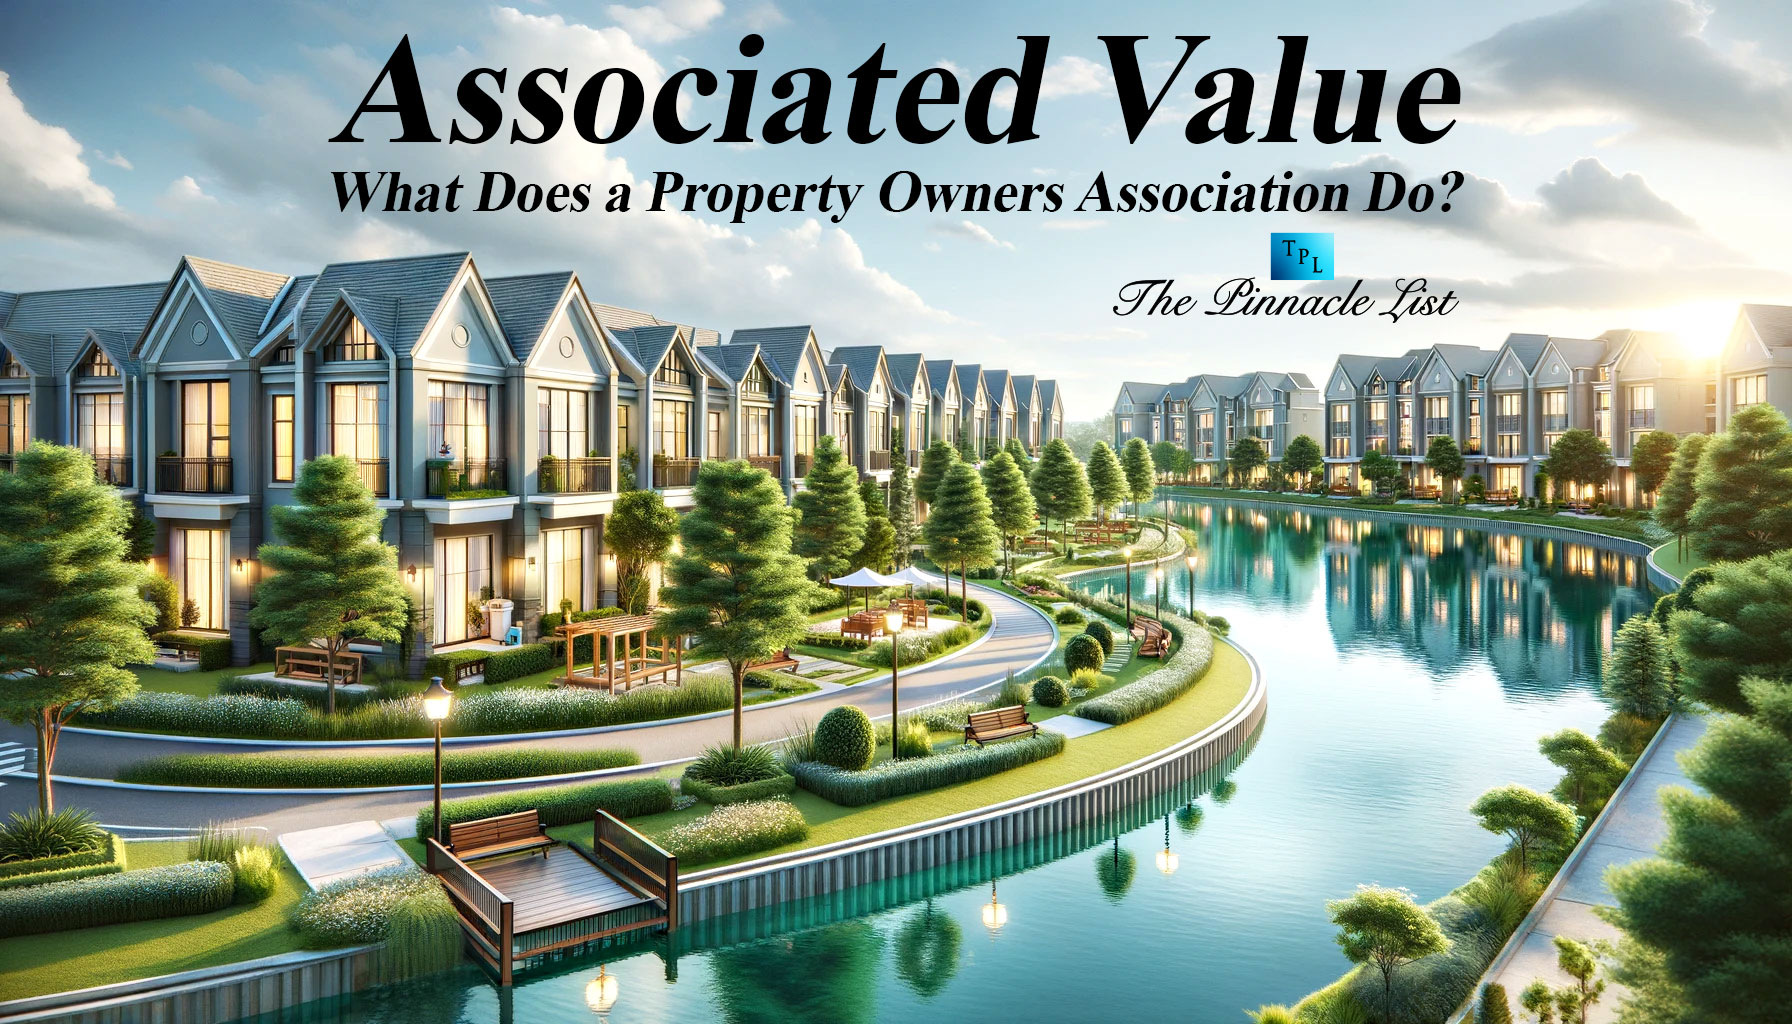 Associated Value: What Does a Property Owners Association Do?